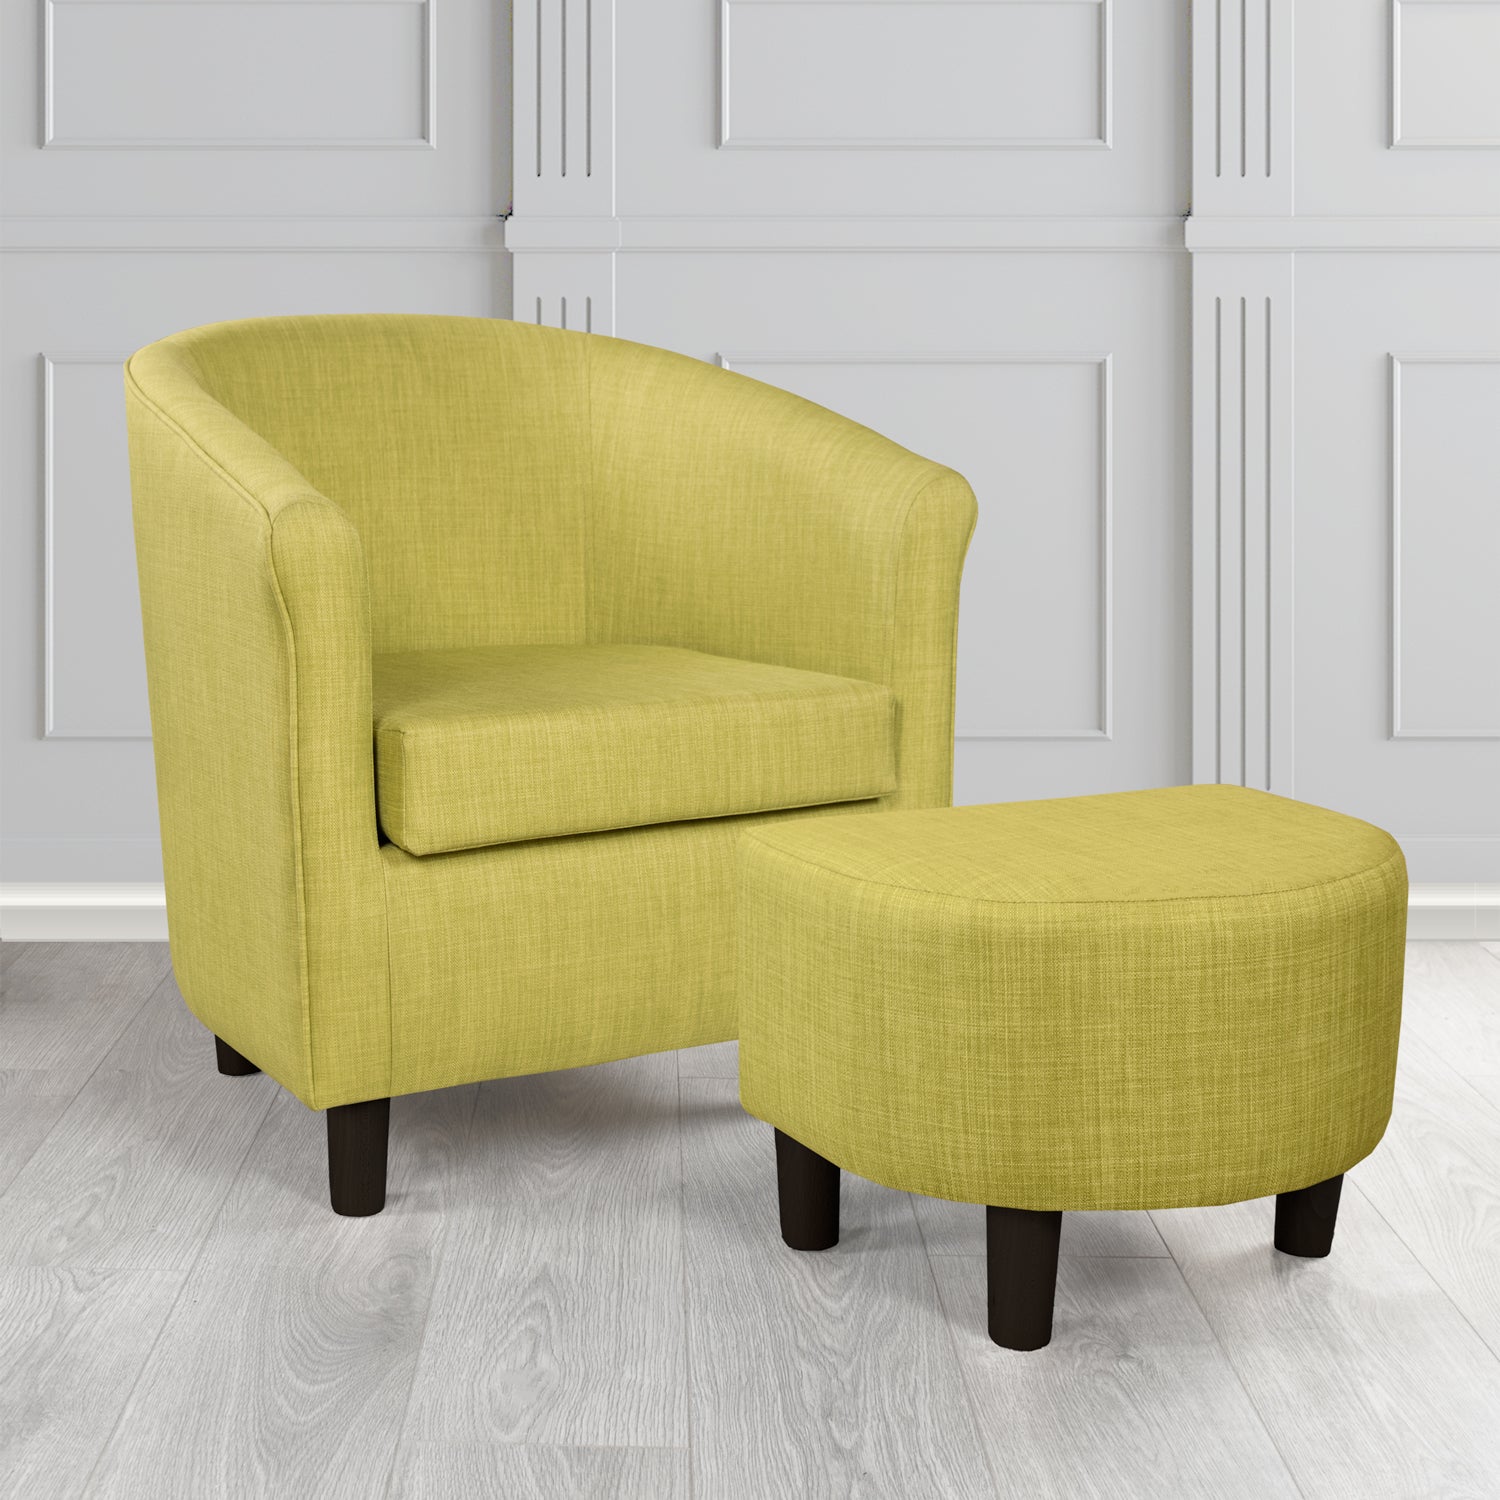 Tuscany Charles Olive Linen Plain Fabric Tub Chair with Dee Footstool Set - The Tub Chair Shop